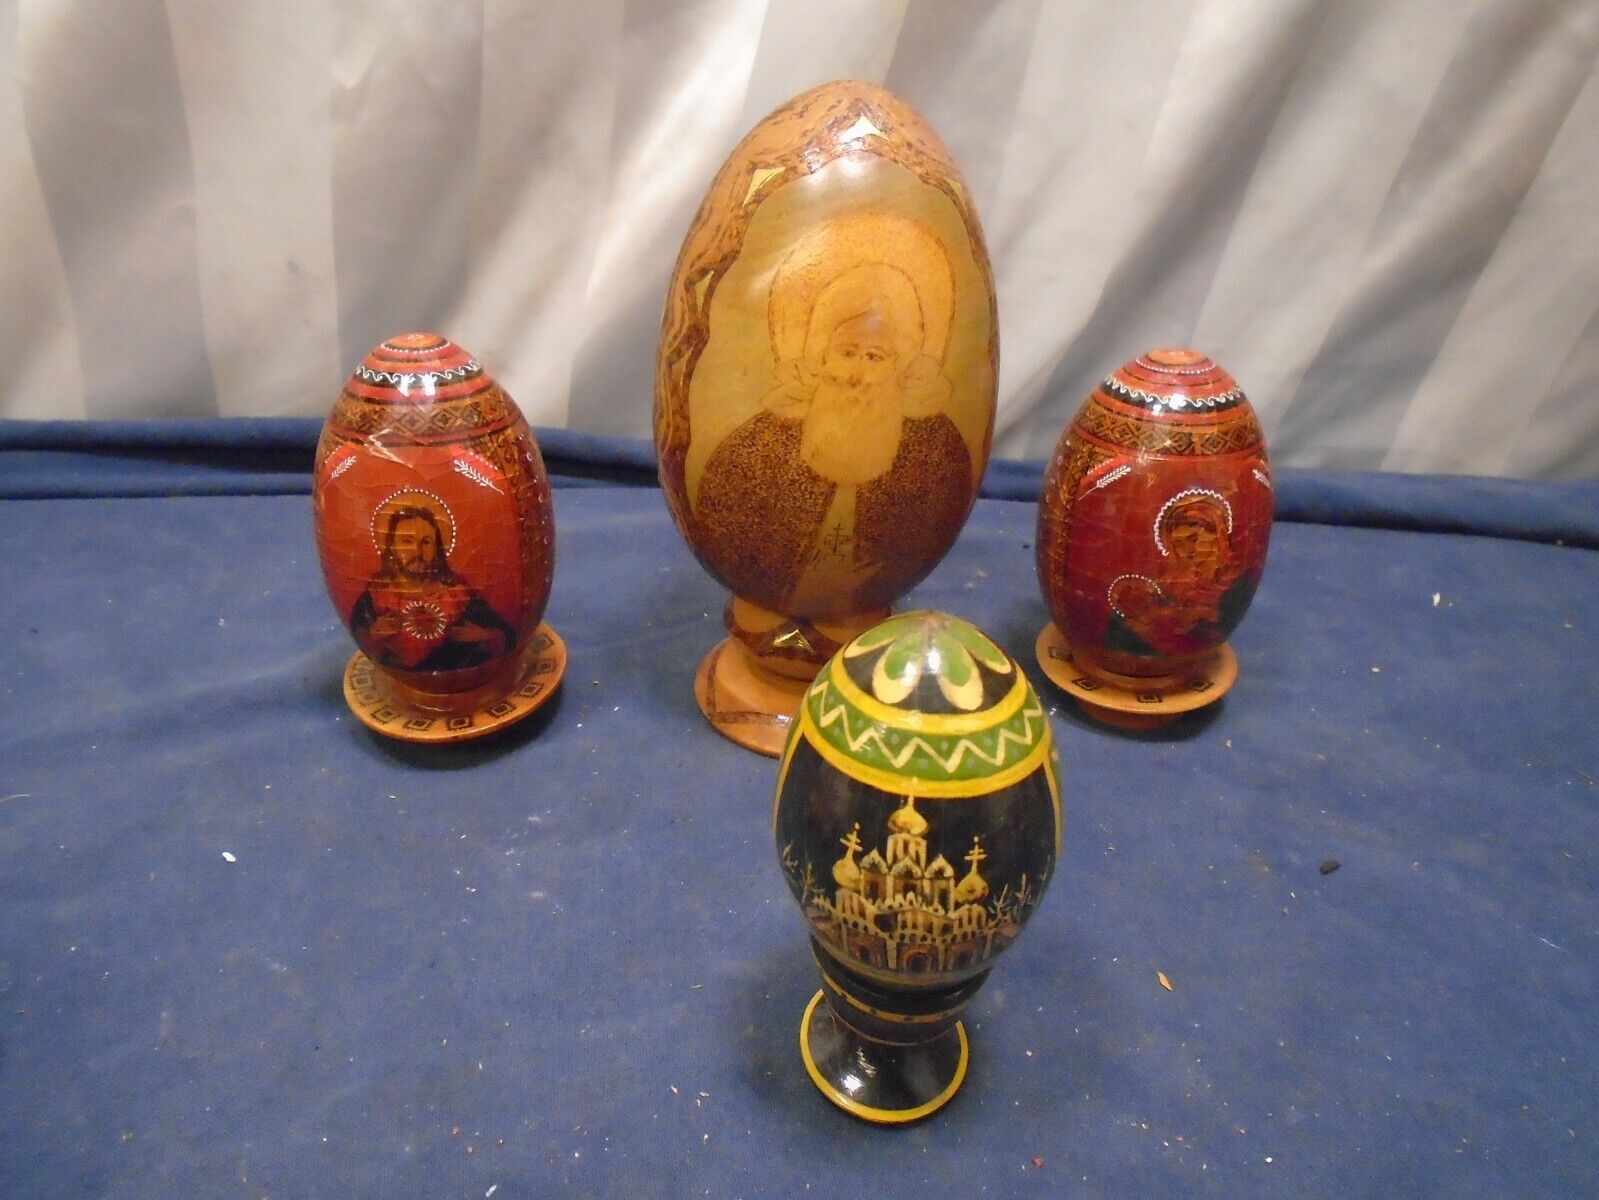 4 VTG Russian Religious Madonna Kremlin Lacquered Eggs Hand Painted Solid Wood